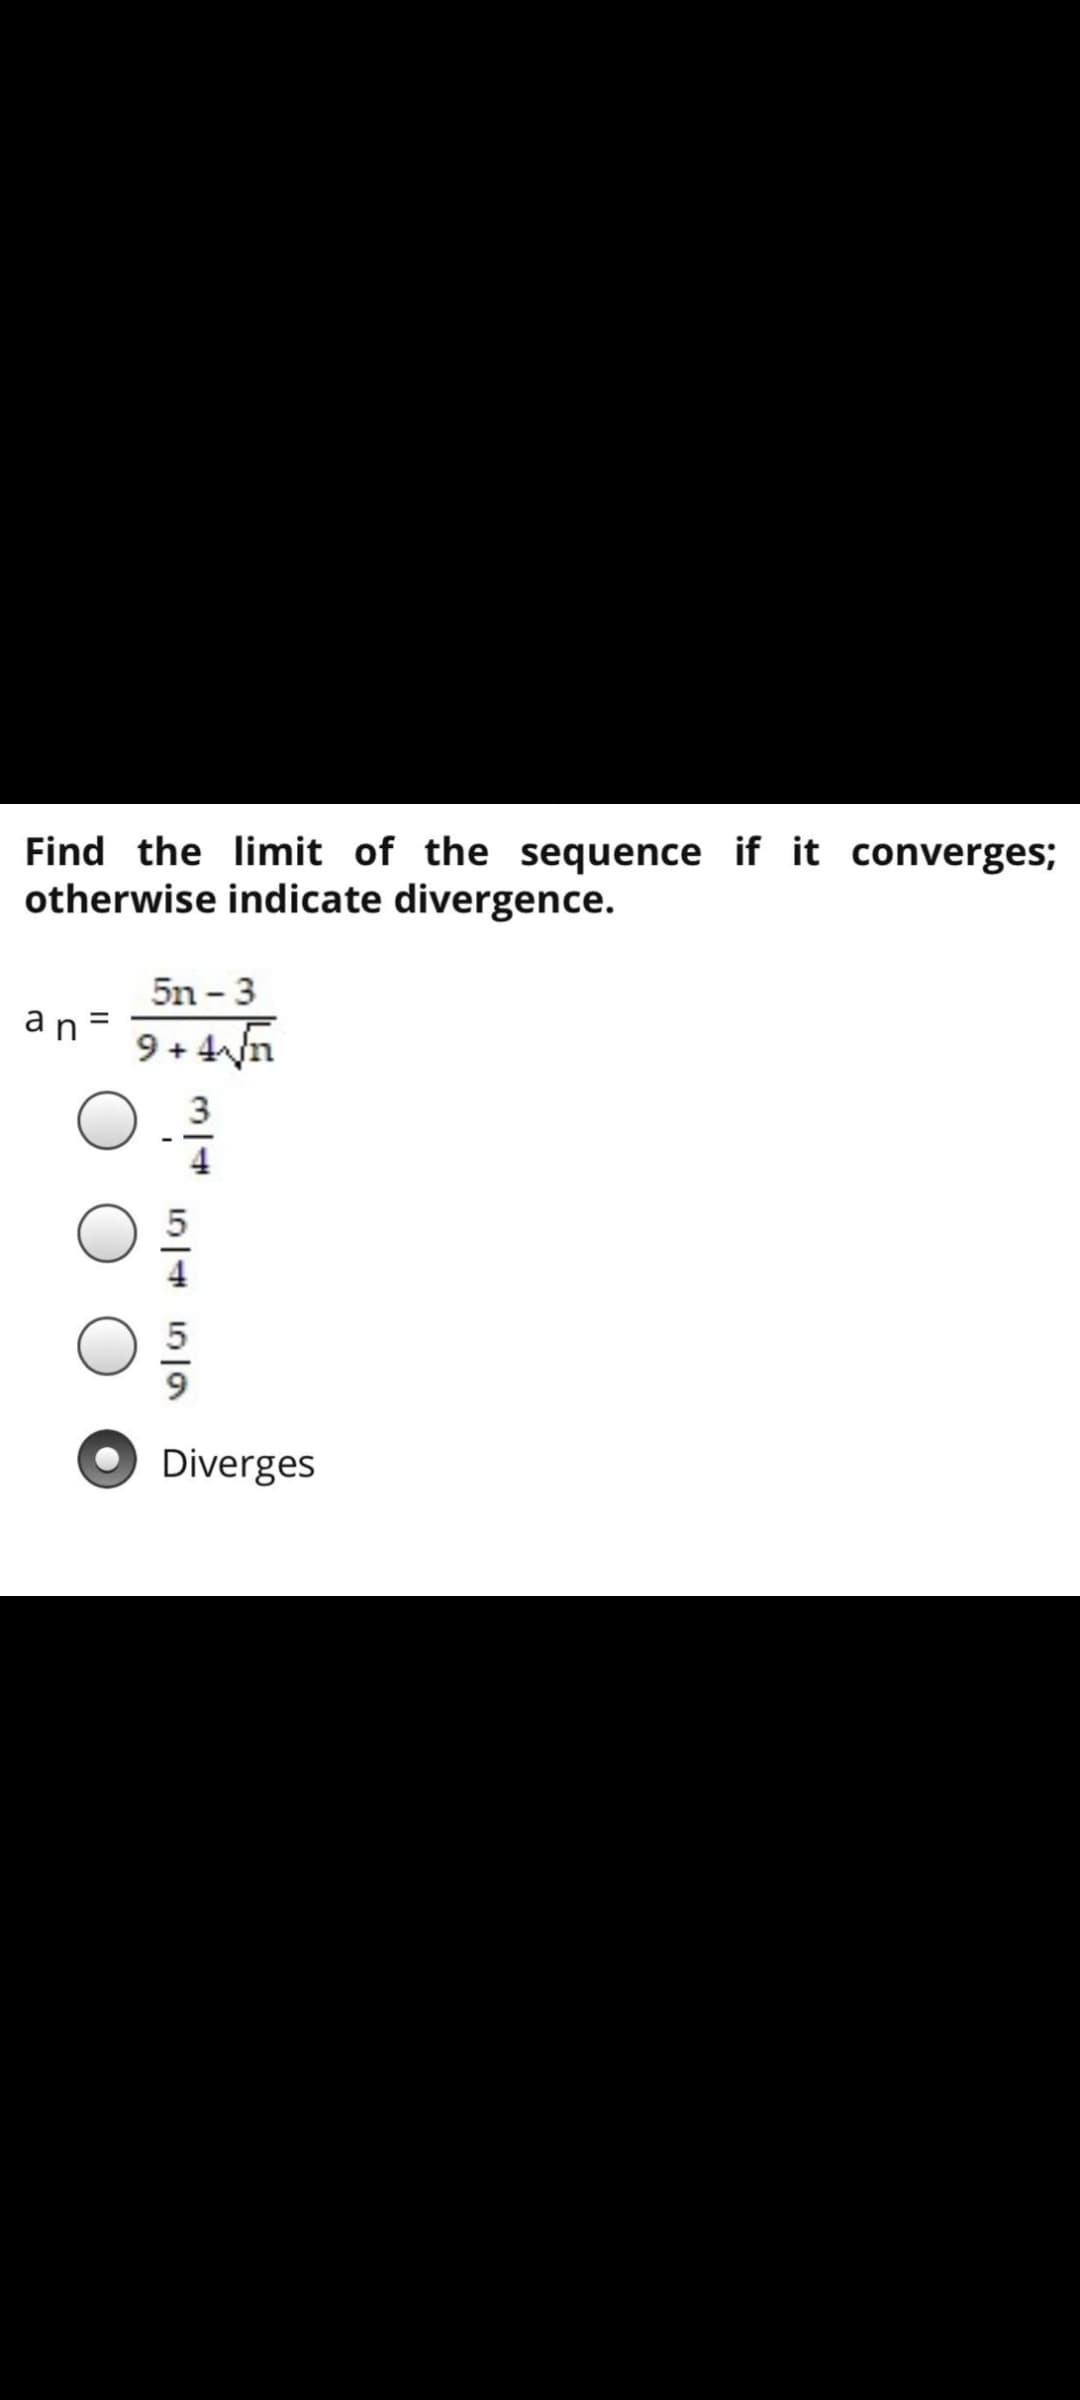 Find the limit of the sequence if it converges;
otherwise indicate divergence.
5n - 3
an=
9 + 4n
3
Diverges
